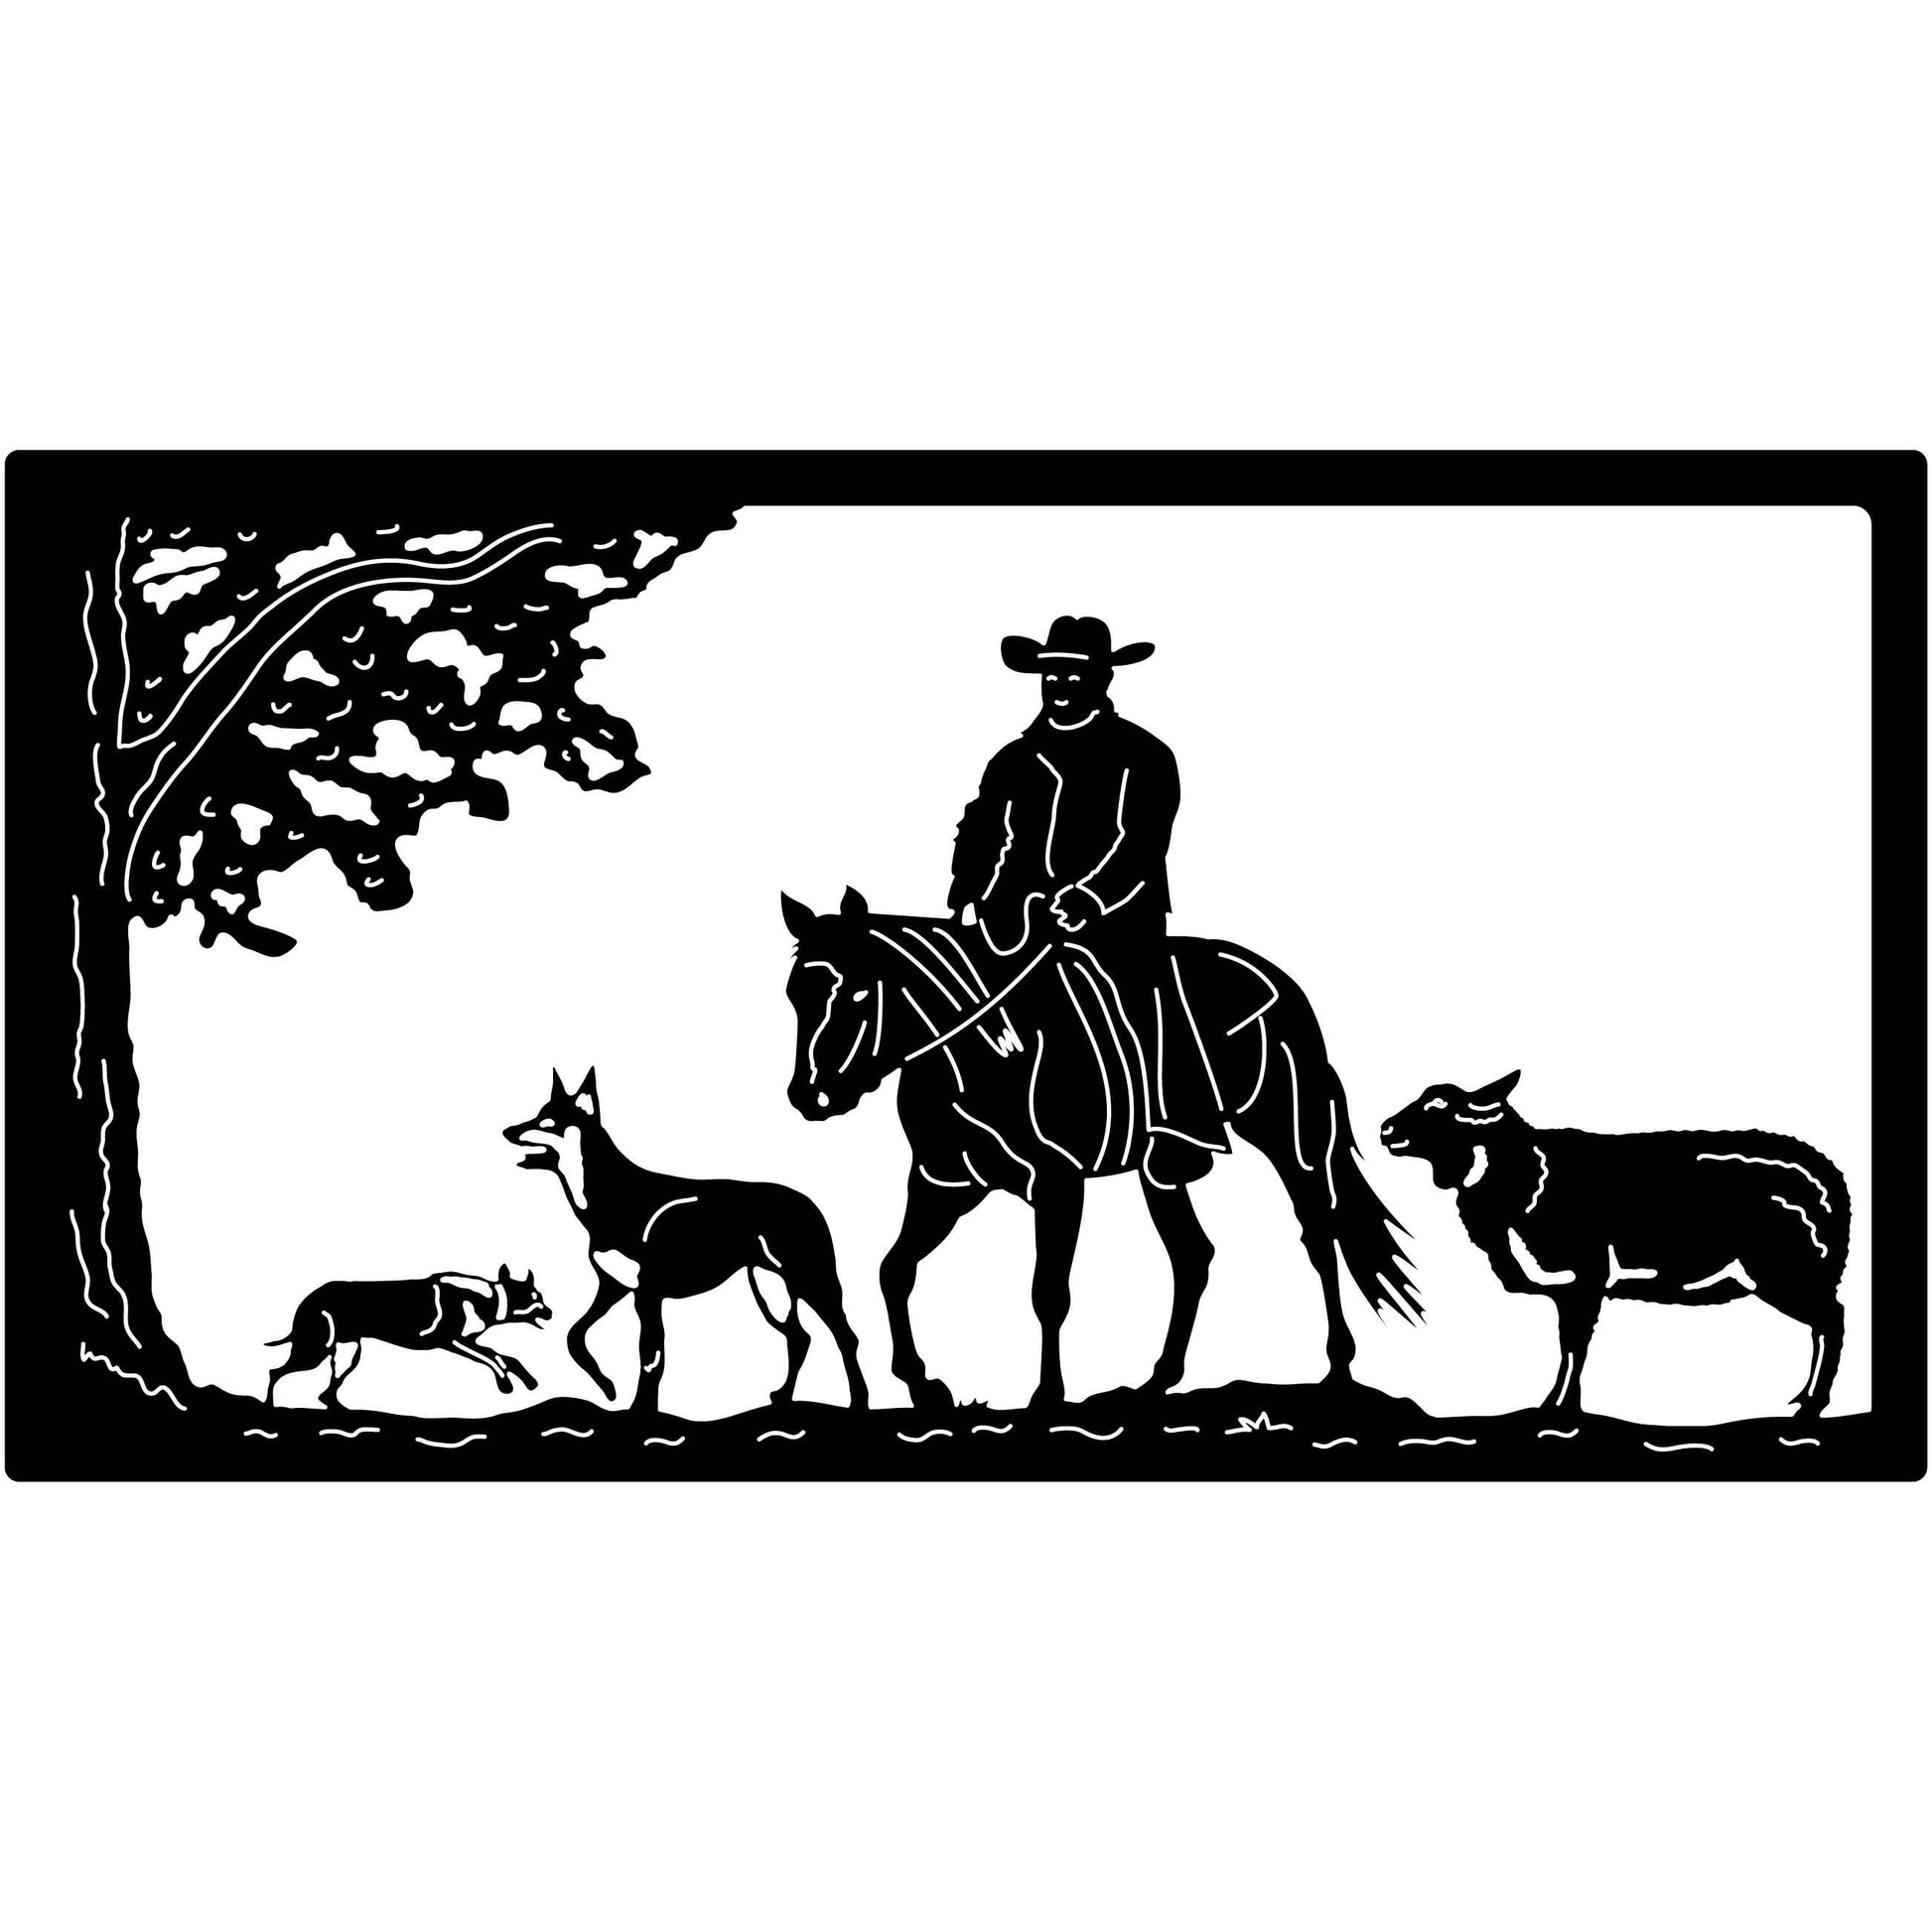 Cowboy Sheep and dogs farm view-DXF files cut ready for cnc machines-dxfforcnc.com